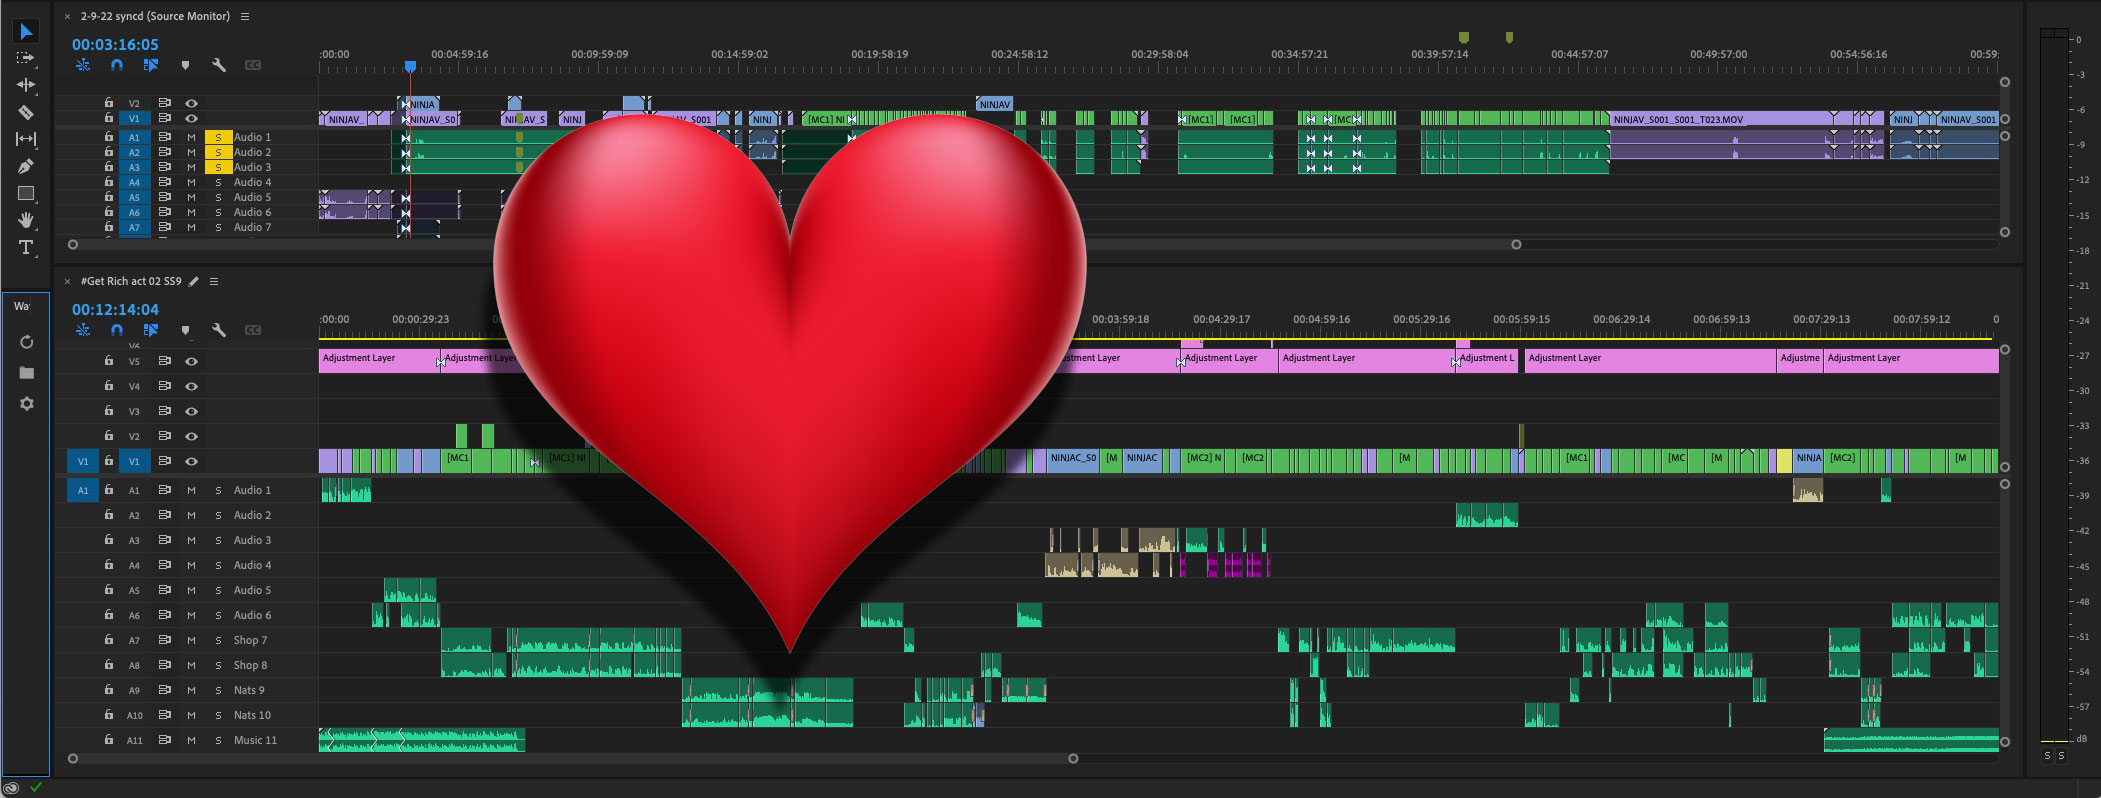 My single most loved feature in Adobe Premiere Pro 28